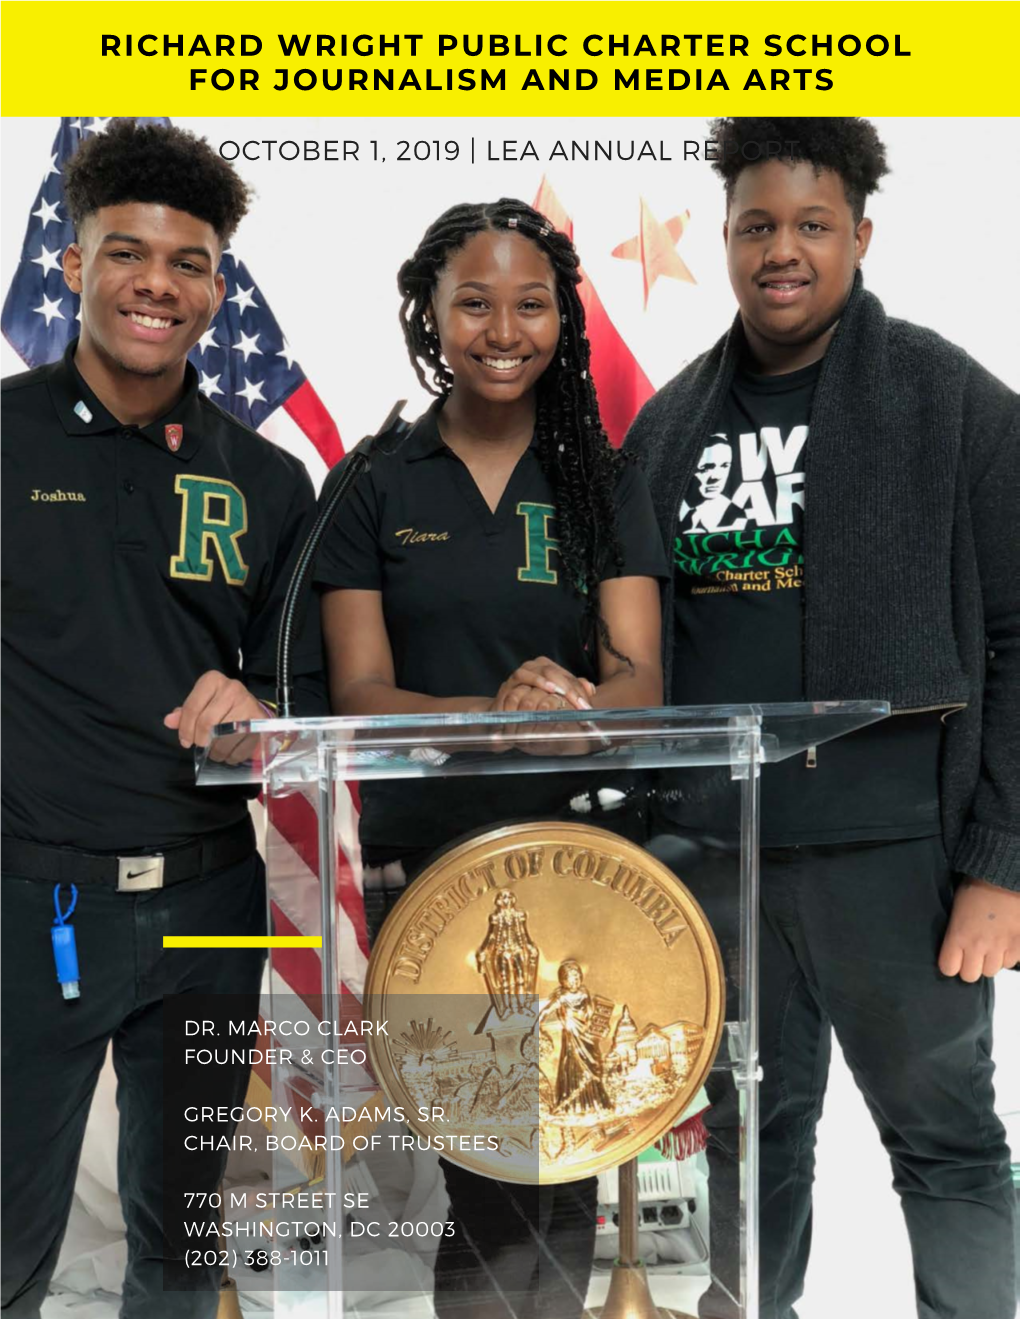 Richard Wright Public Charter School for Journalism and Media Arts Lea Annual Report